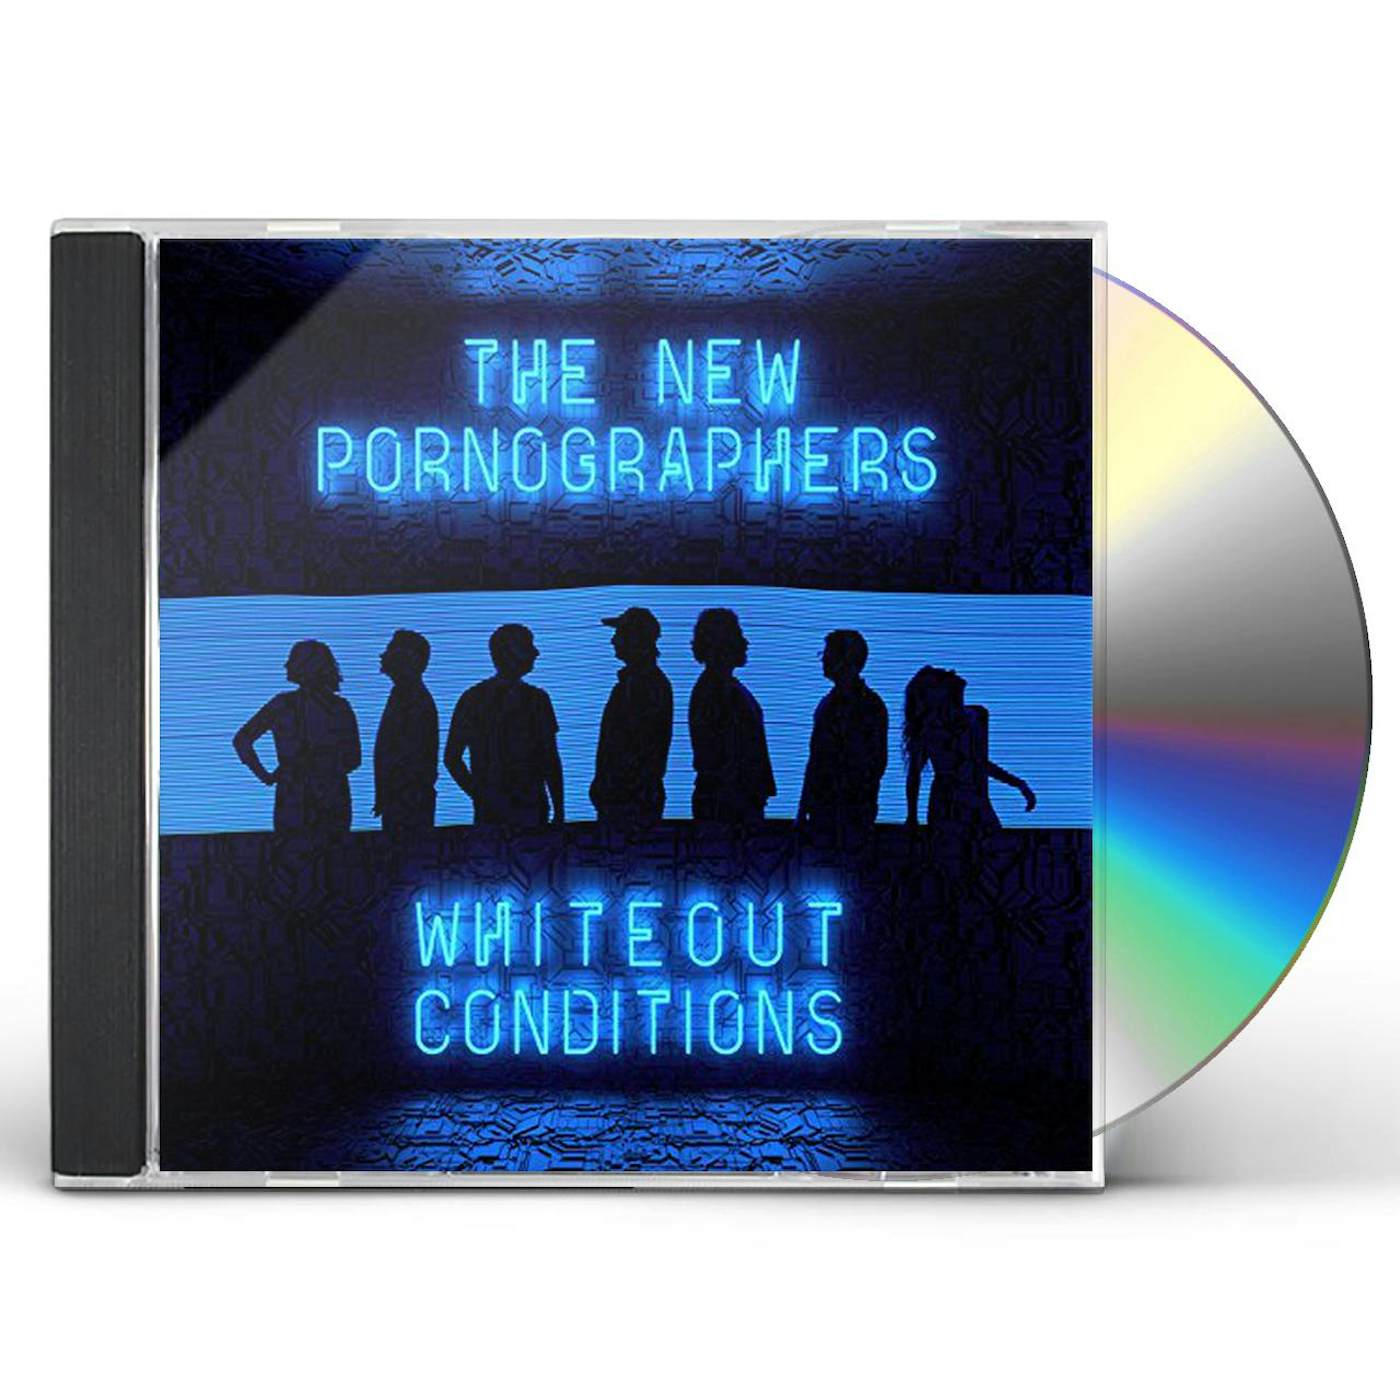 The New Pornographers WHITEOUT CONDITIONS CD